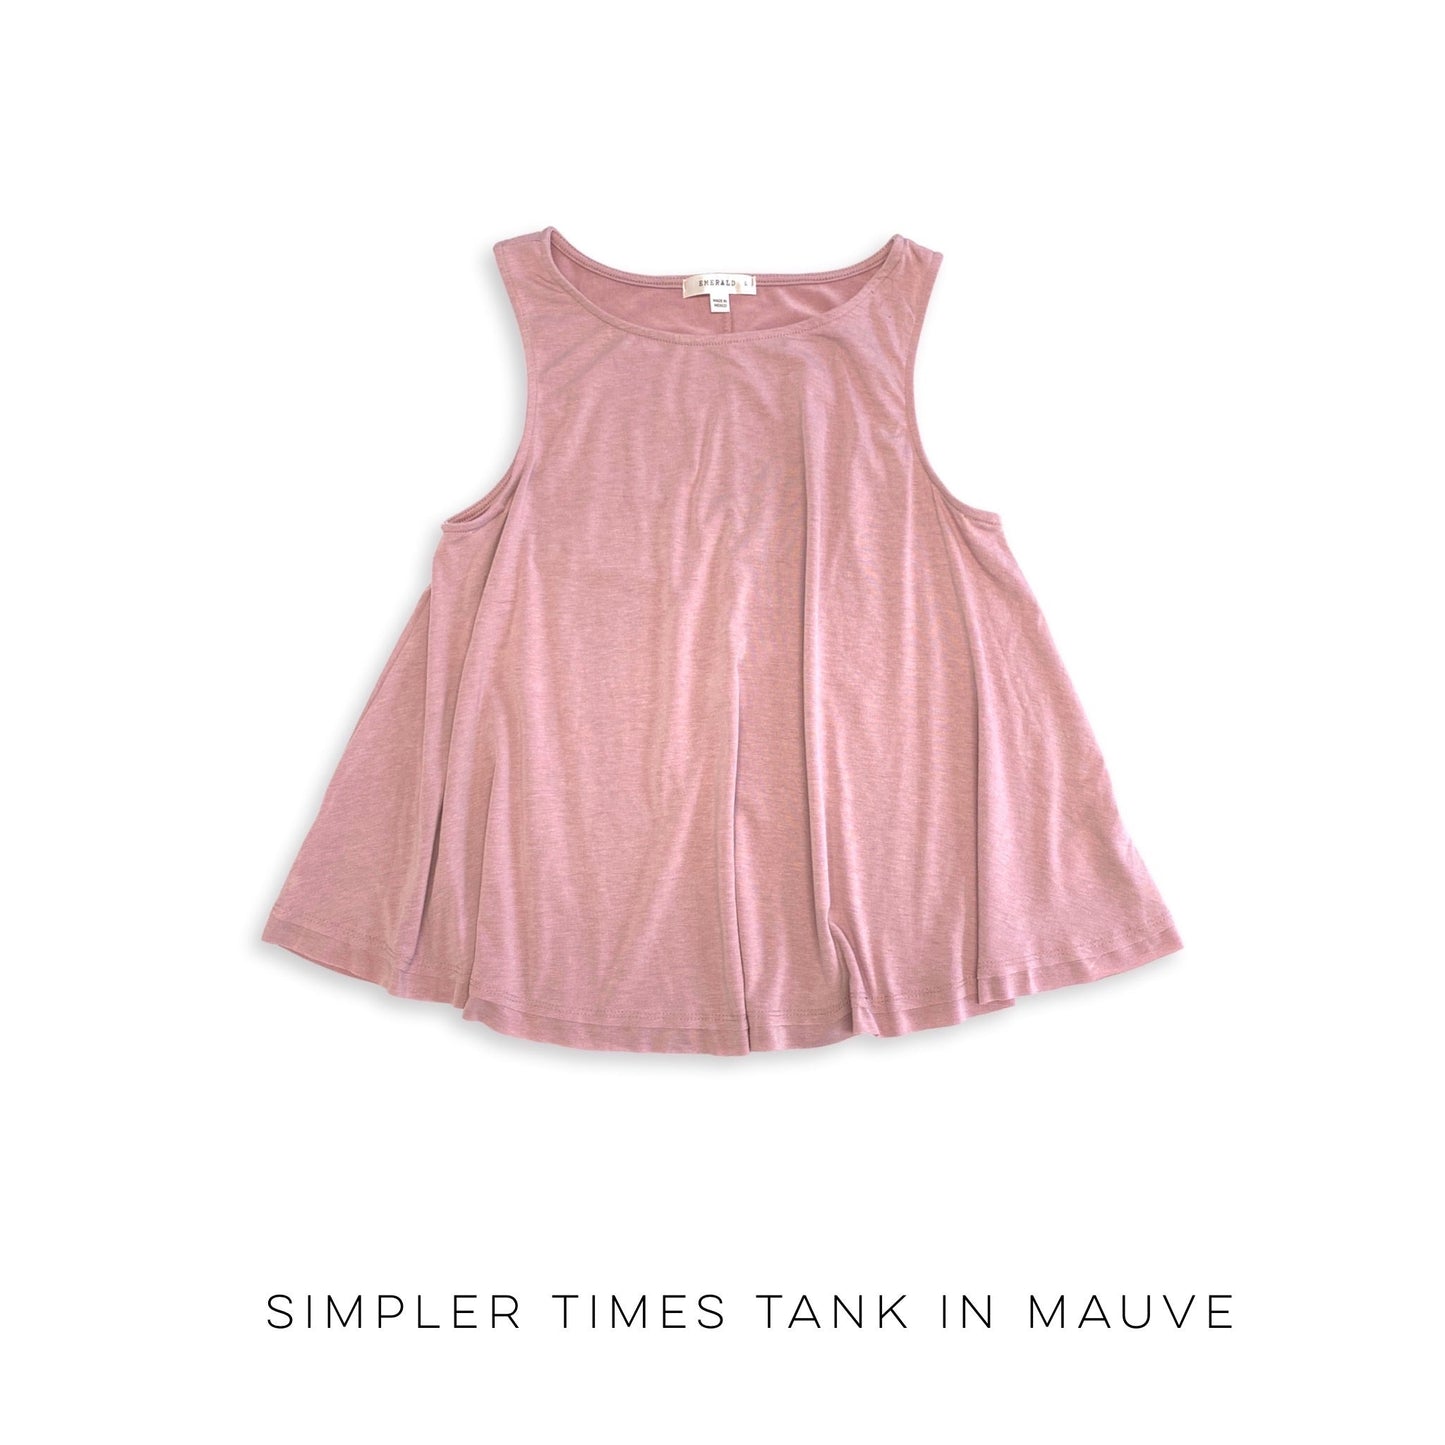 Simpler Times Tank in Mauve